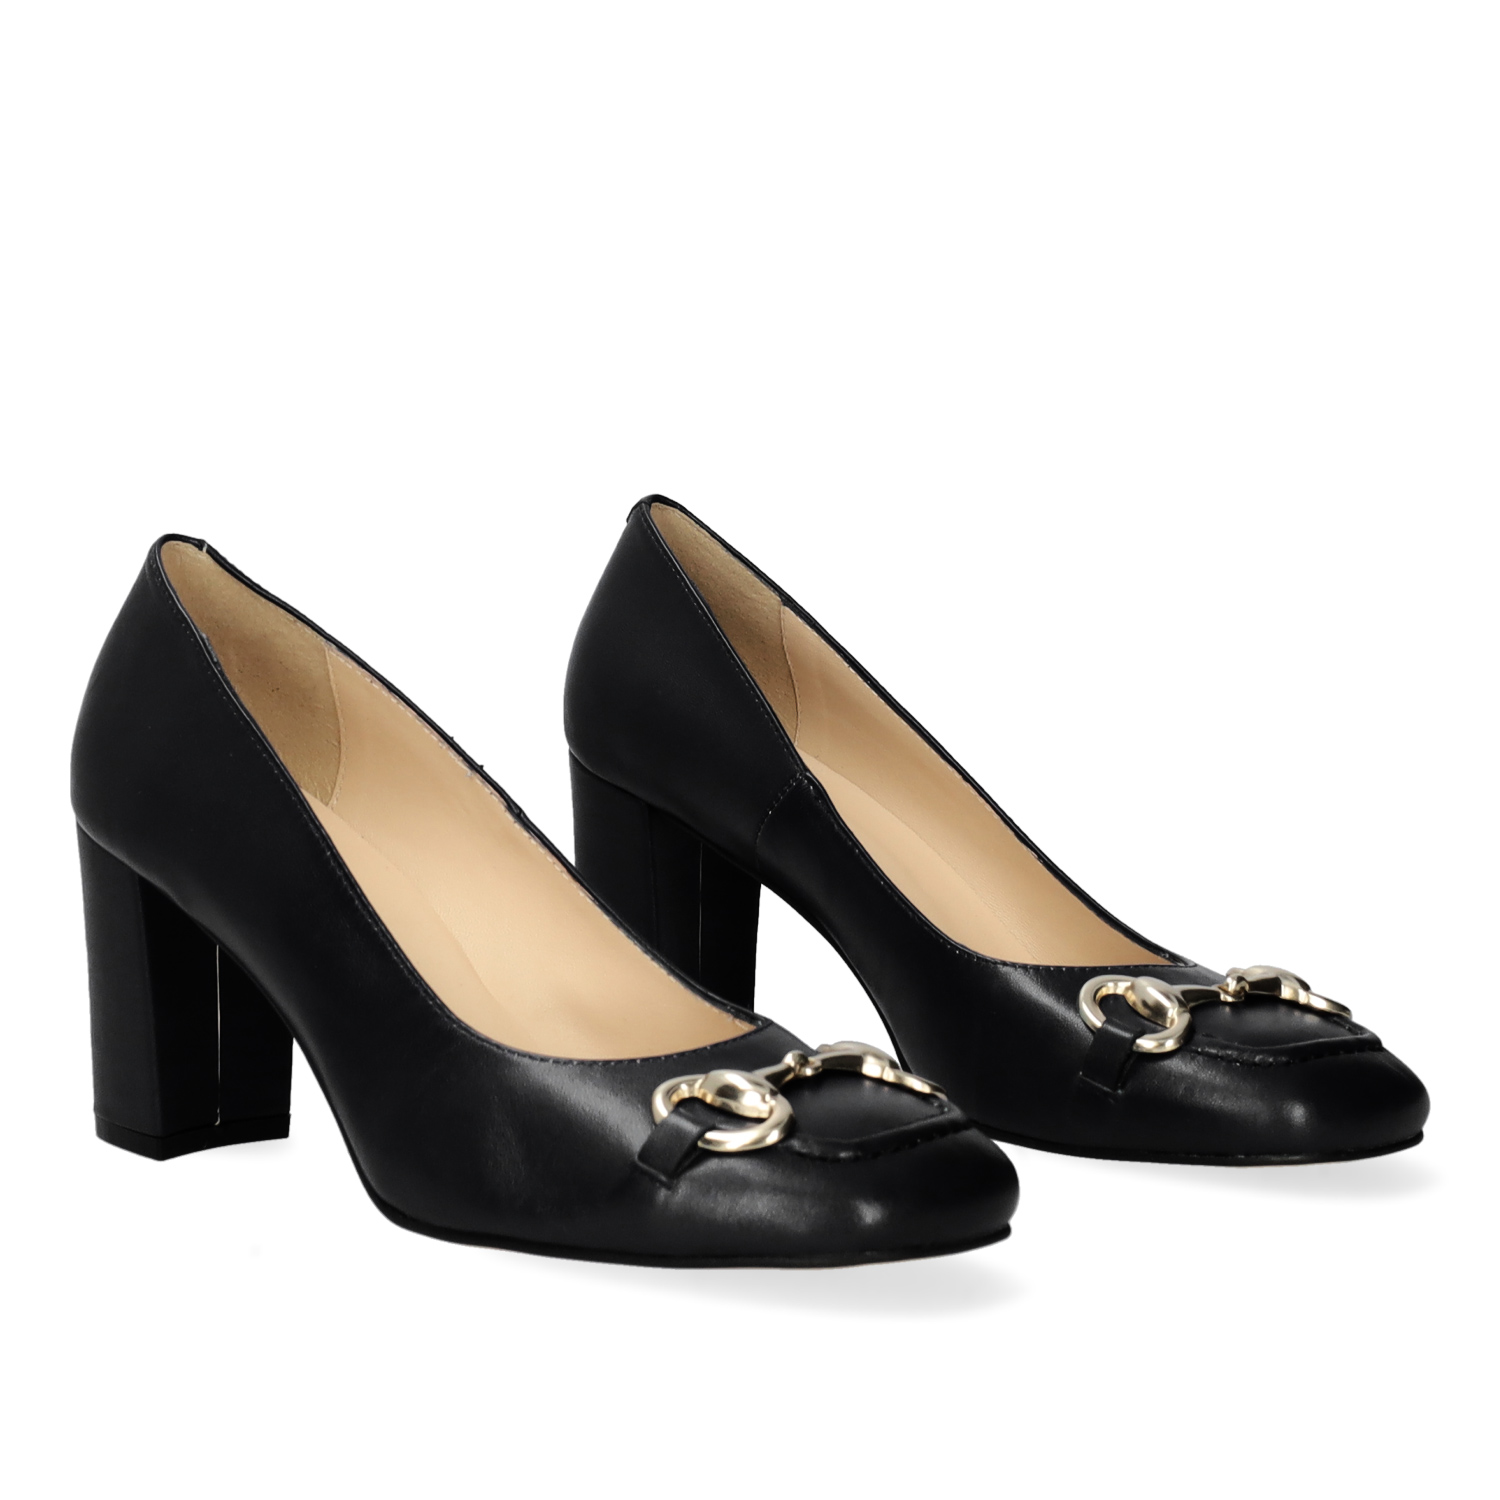 Vintage style heeled shoes in black leather 